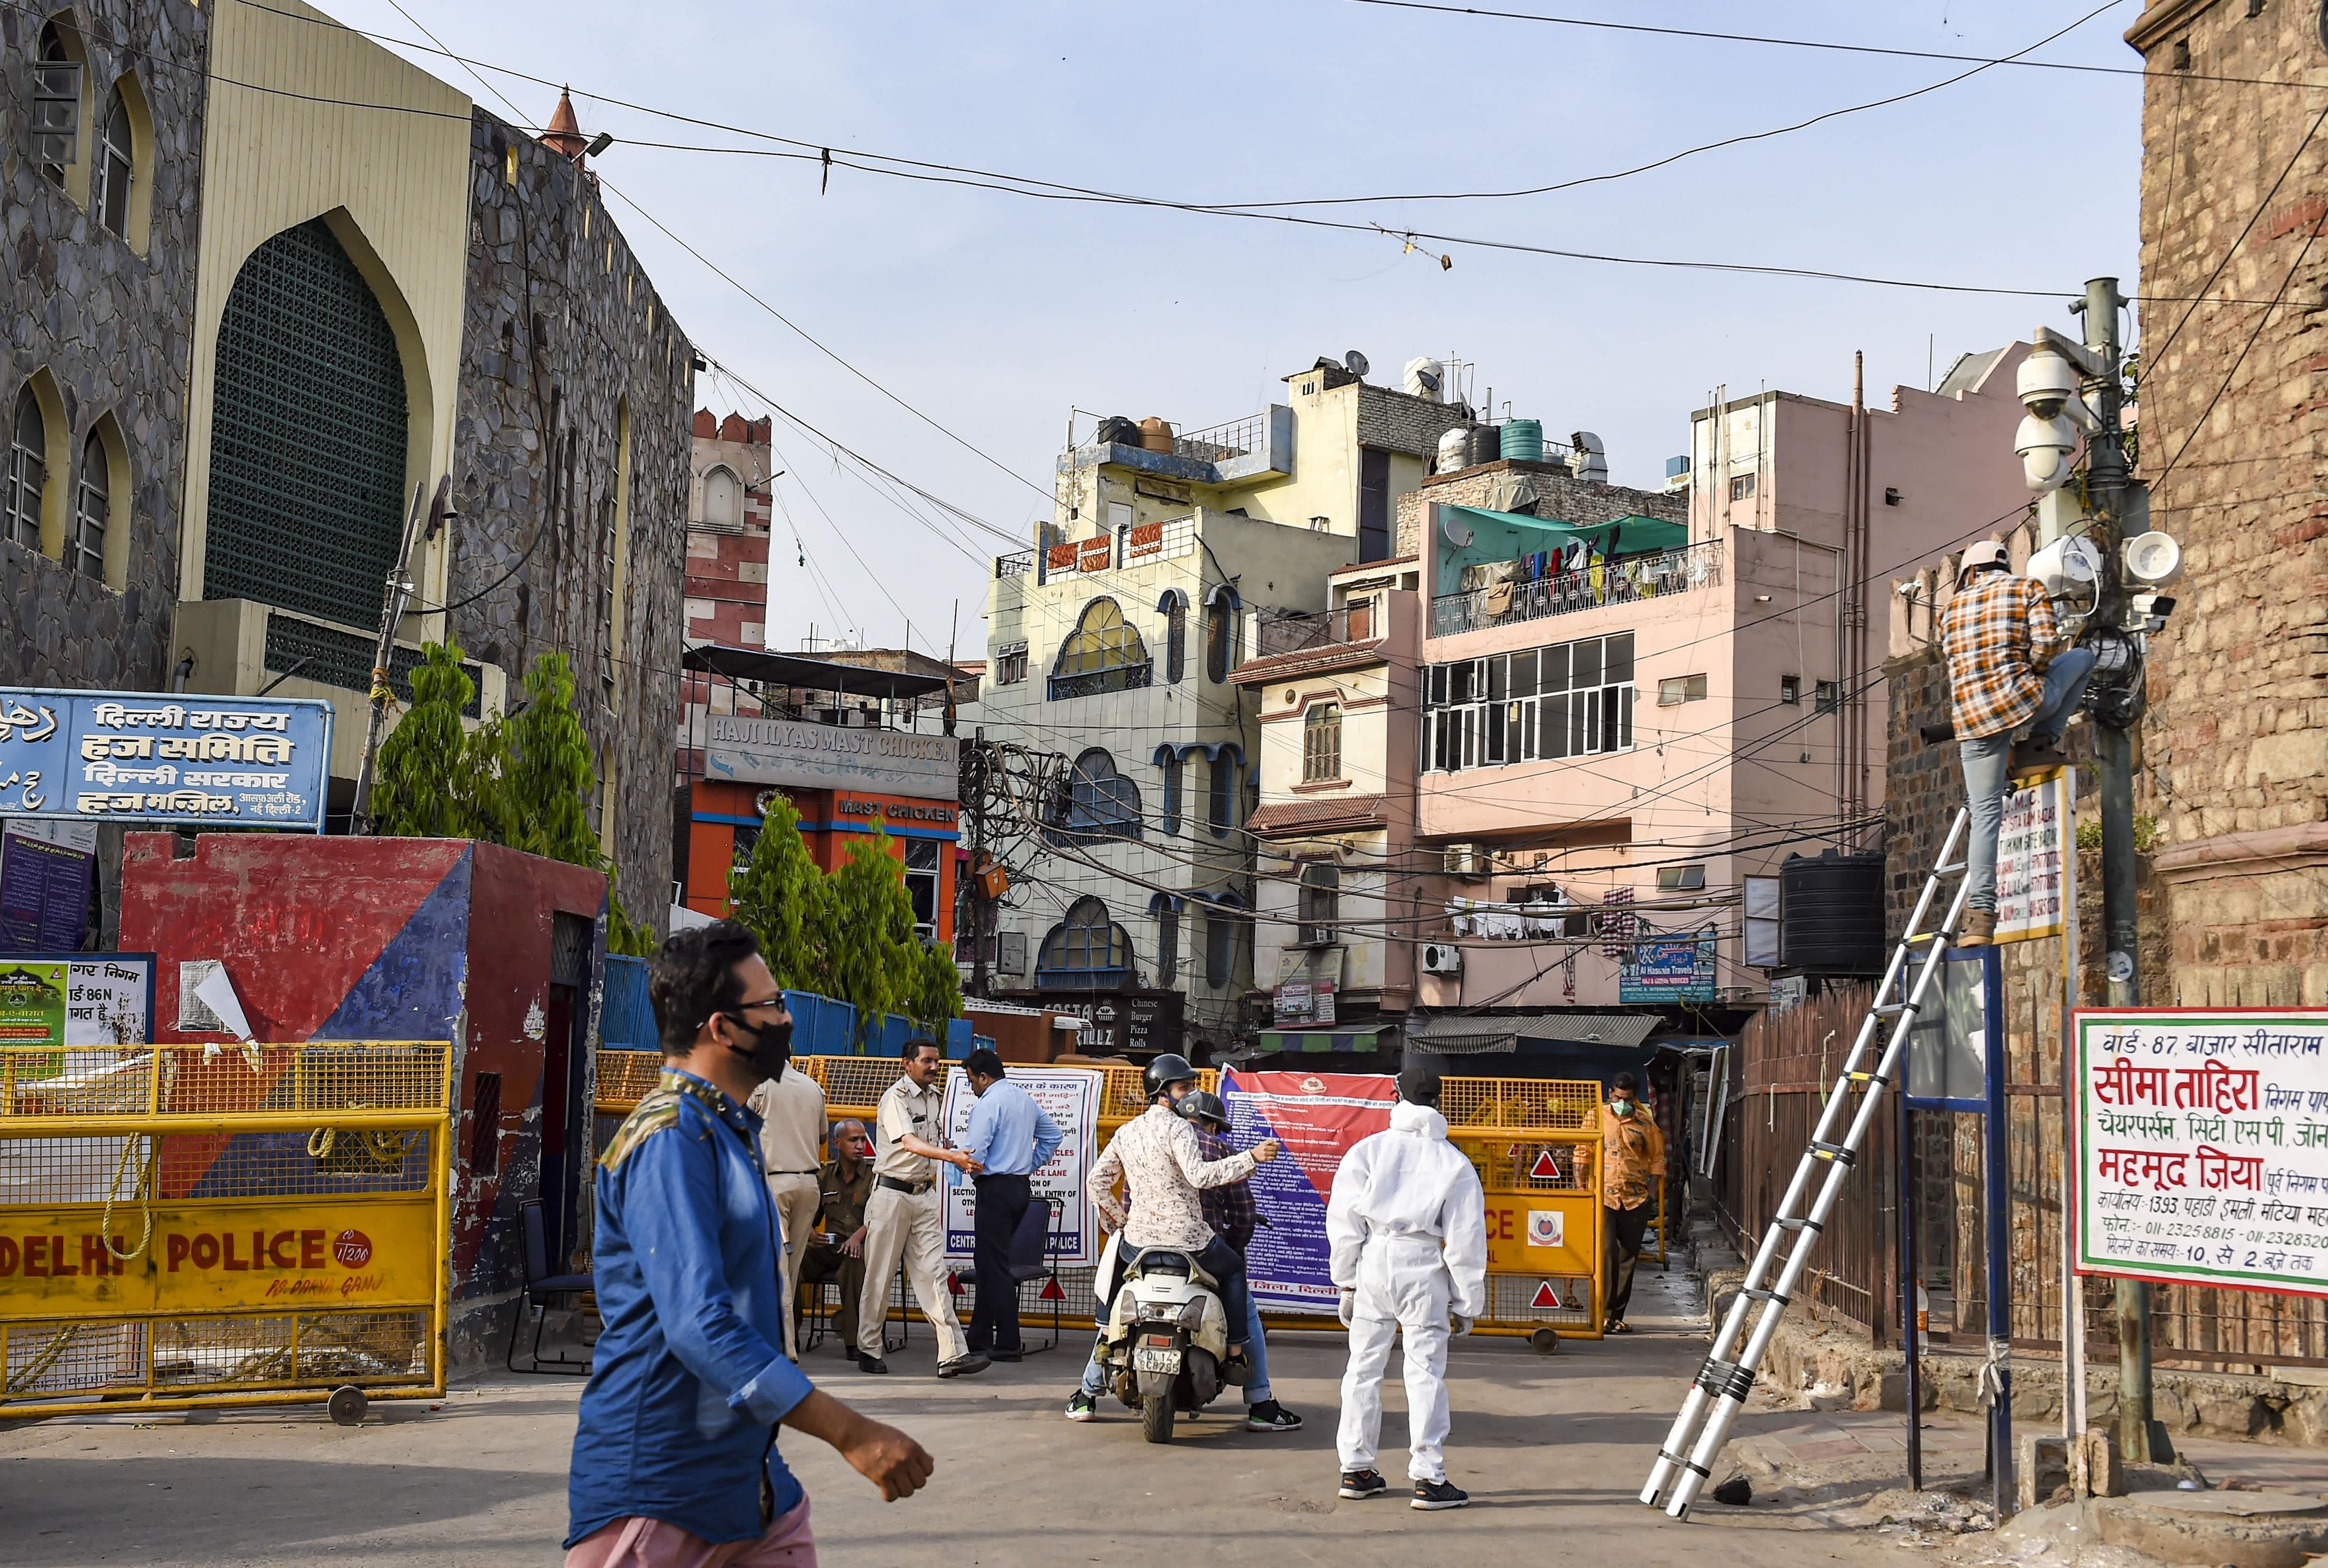  A worker sets CCTV around Chandni Mahal area, identified as a COVID-19 containment zone, during the nationwide lockdown to curb the spread of coronavirus, in Old Delhi. (Credit: PTI Photo)